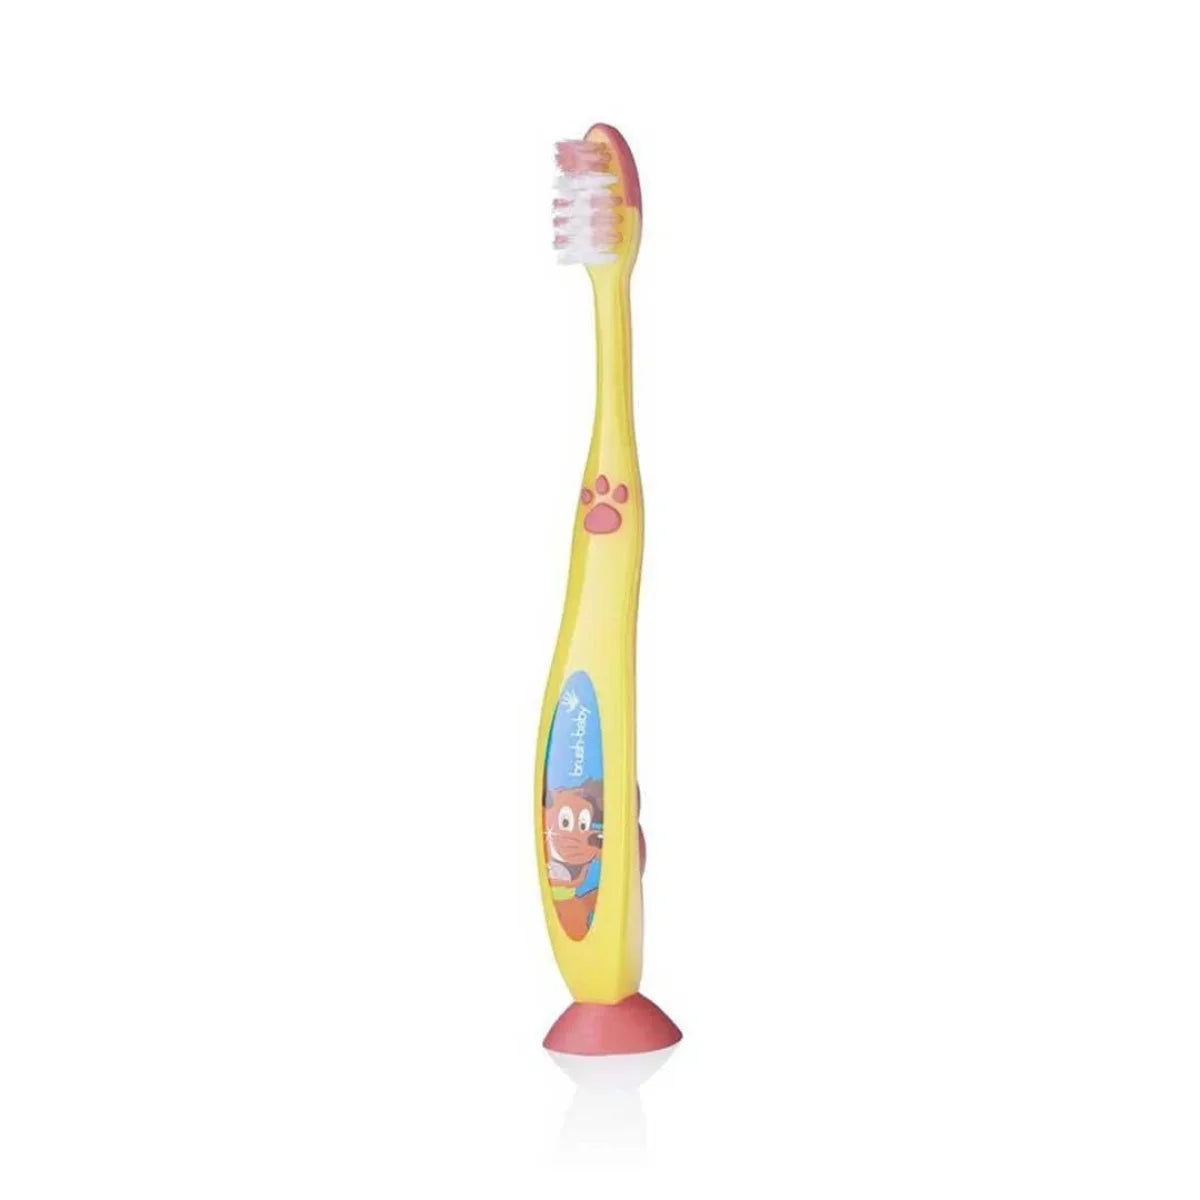 flossbrush soft bristles toothbrush for kids in yellow with orange sucker feet for 6+ year olds